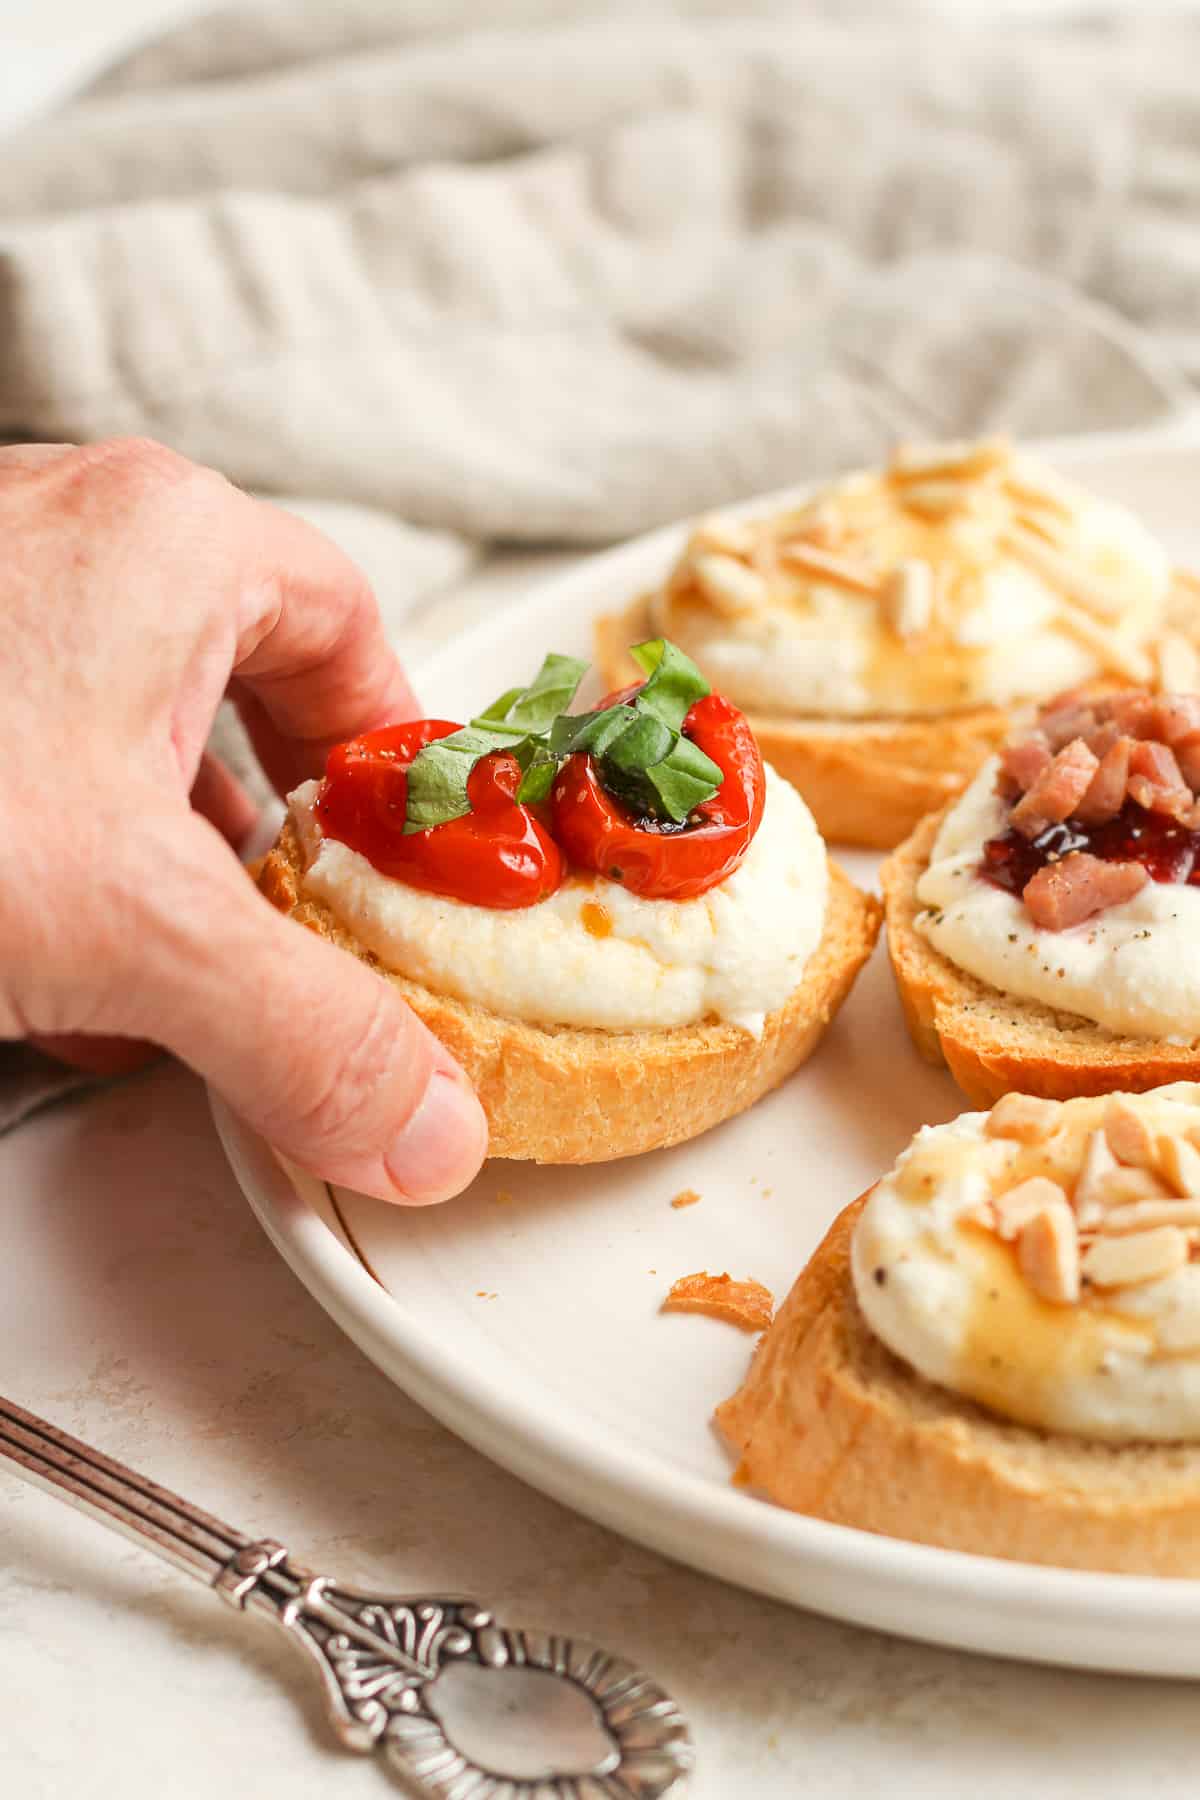 A hand reaching for a ricotta crostini on a plate of other crostini.